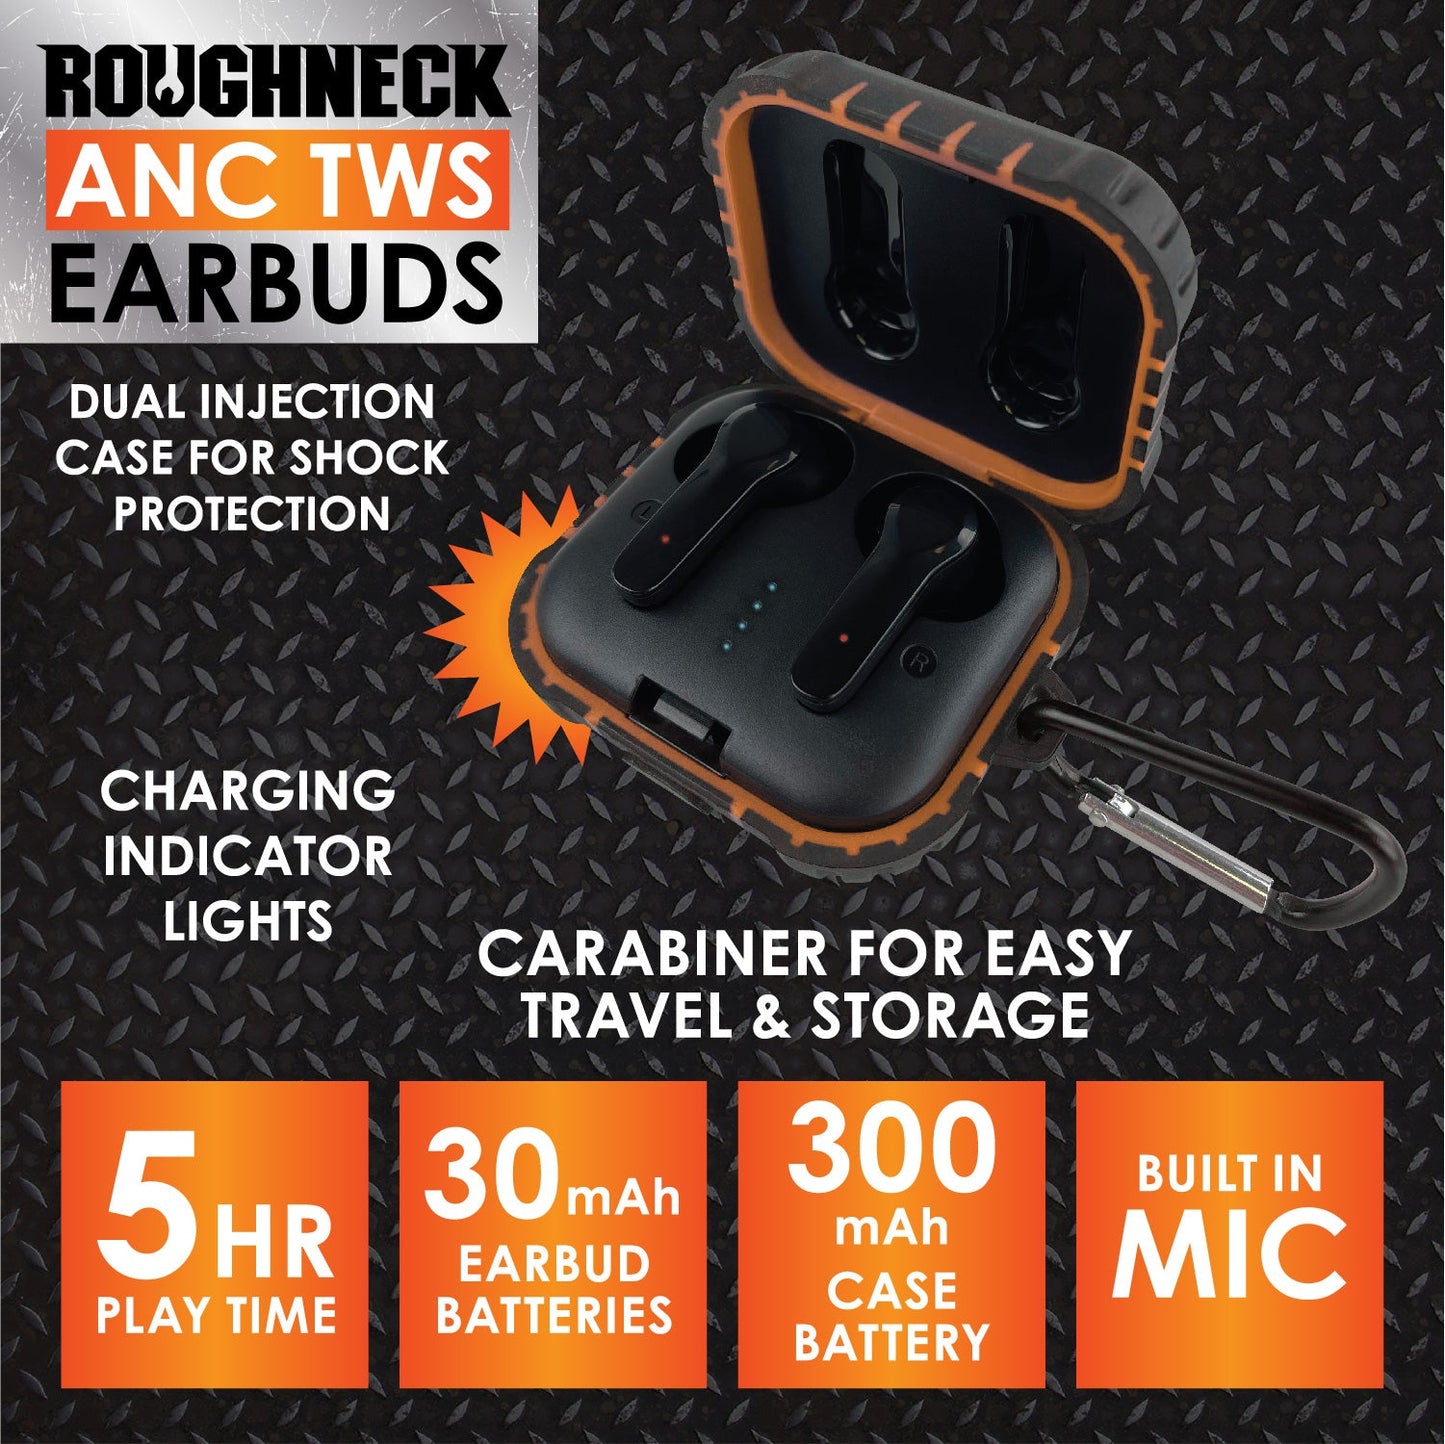 ITEM NUMBER 023695L ROUGHNECK WIRELESS EARBUDS - STORE SURPLUS NO DISPLAY 6 PIECES PER PACK